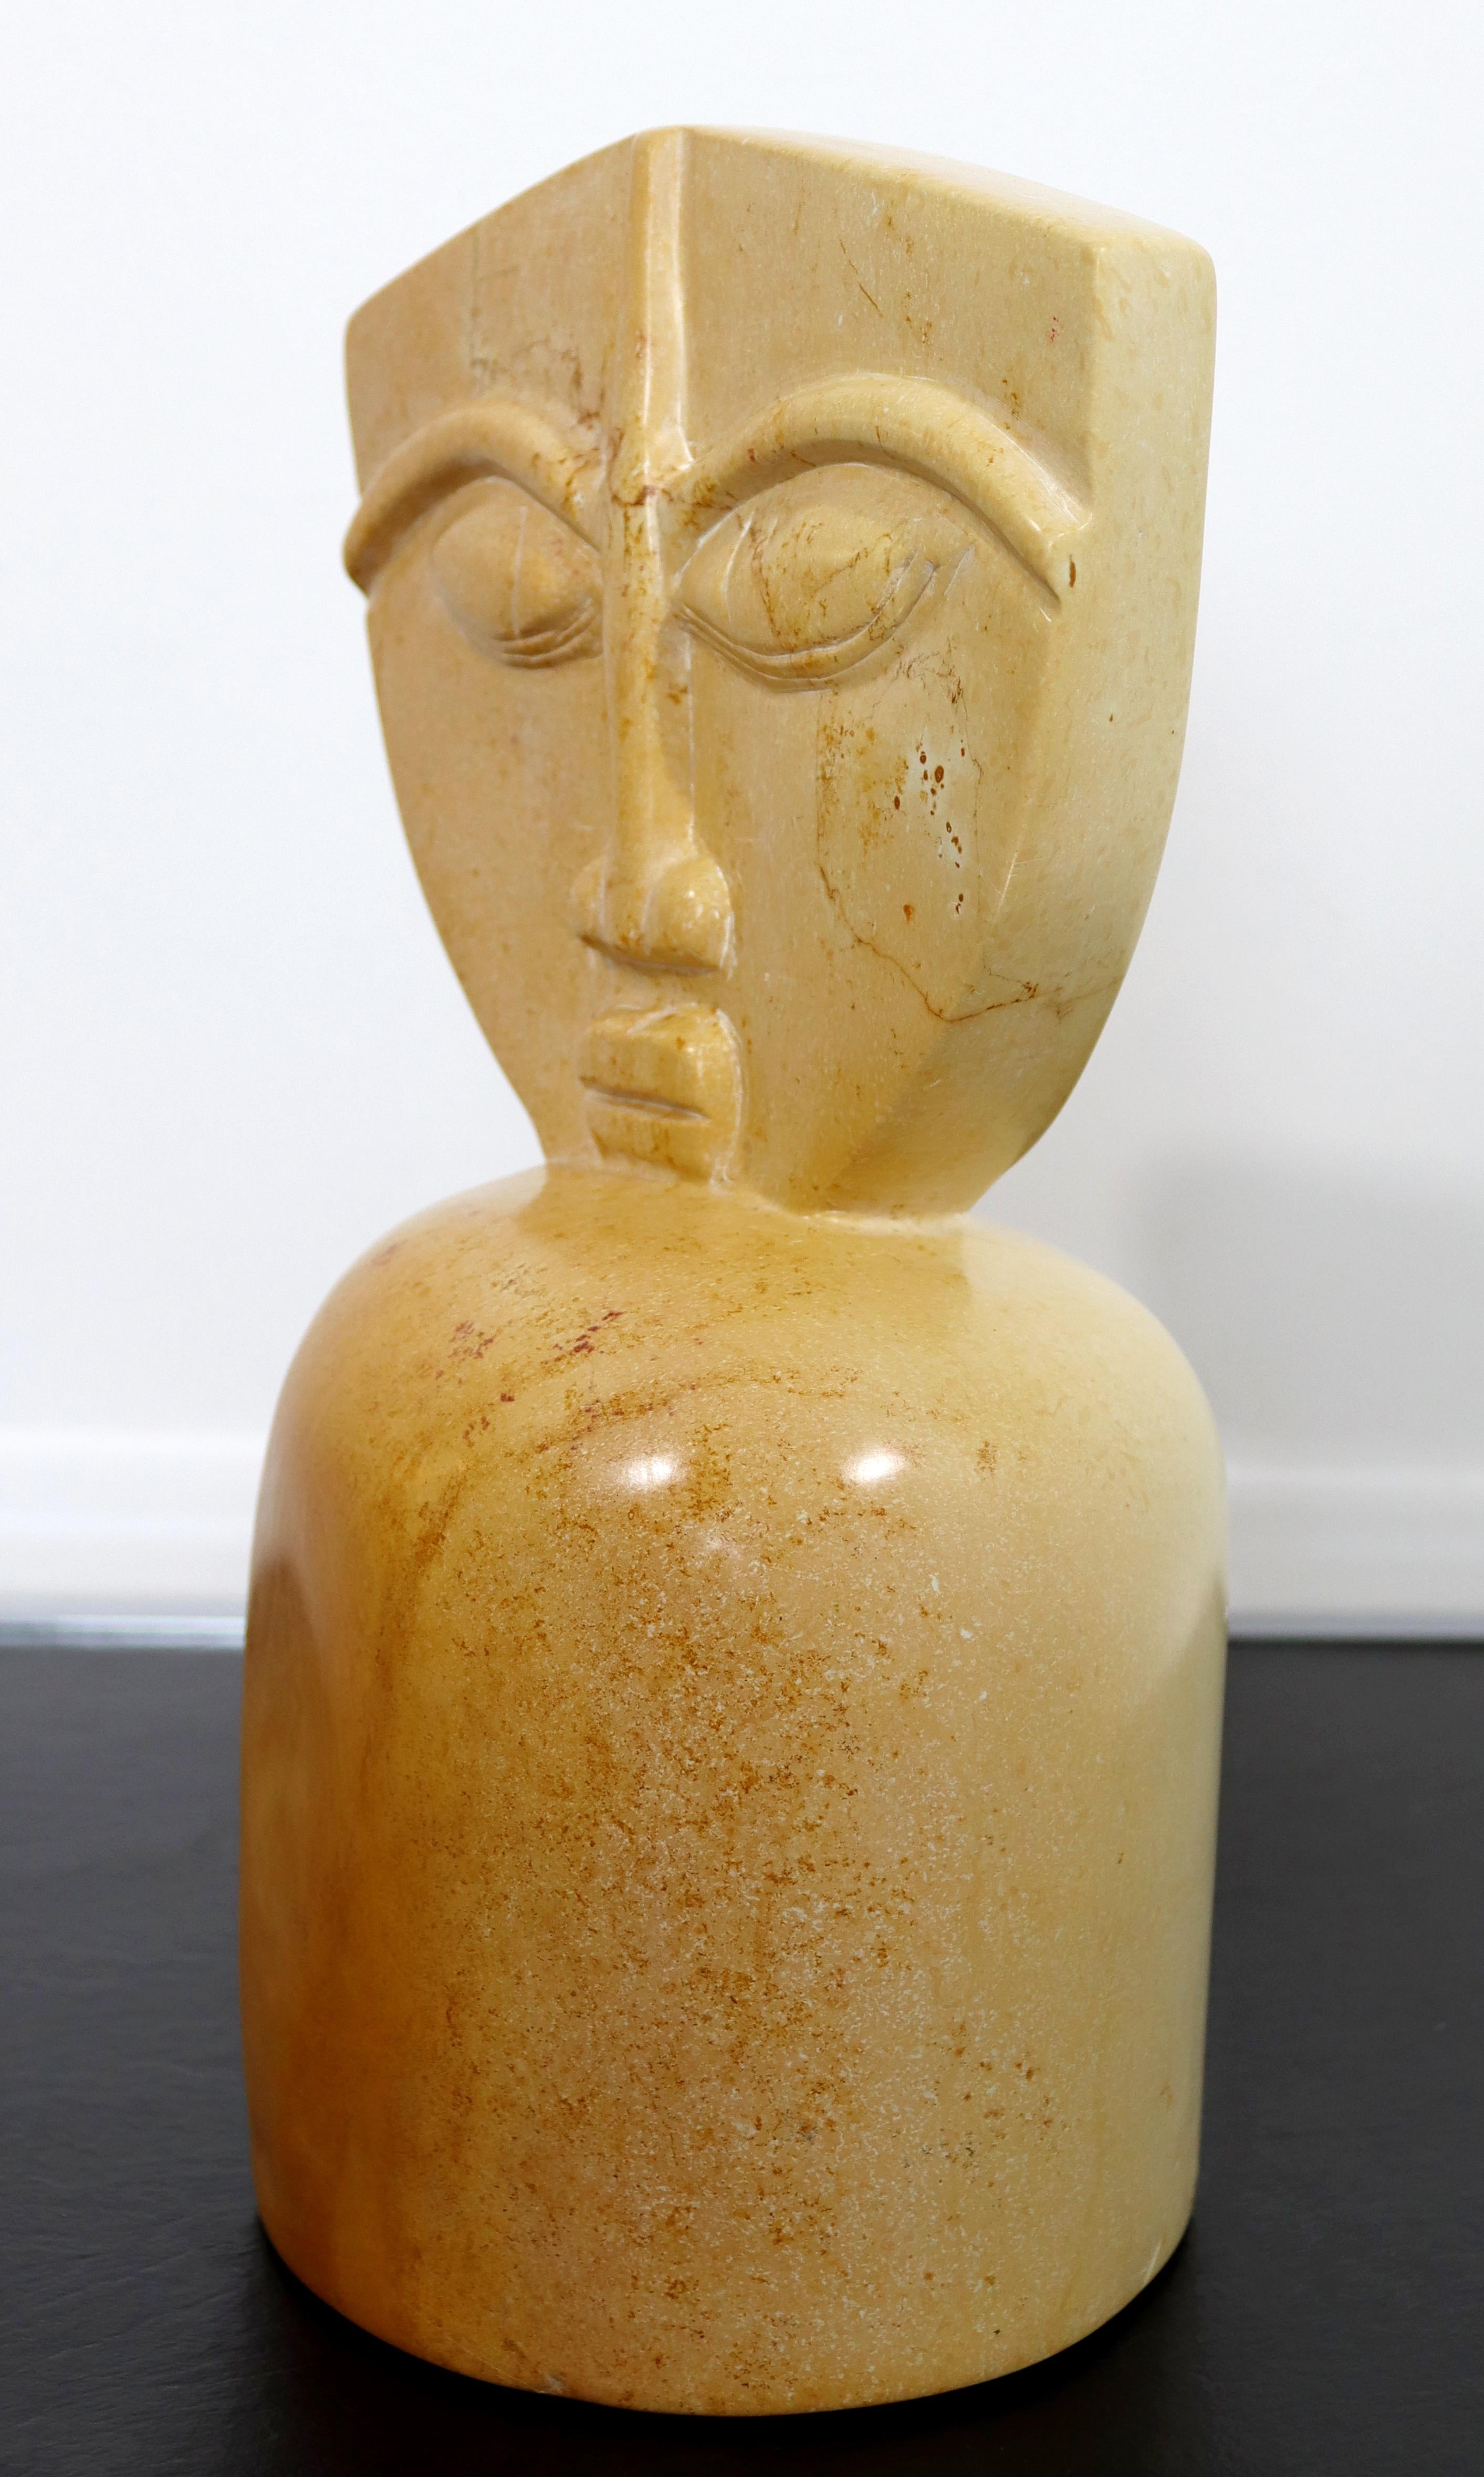 For your consideration is a magnificent, marble table sculpture of a face. In excellent condition. The dimensions are 7